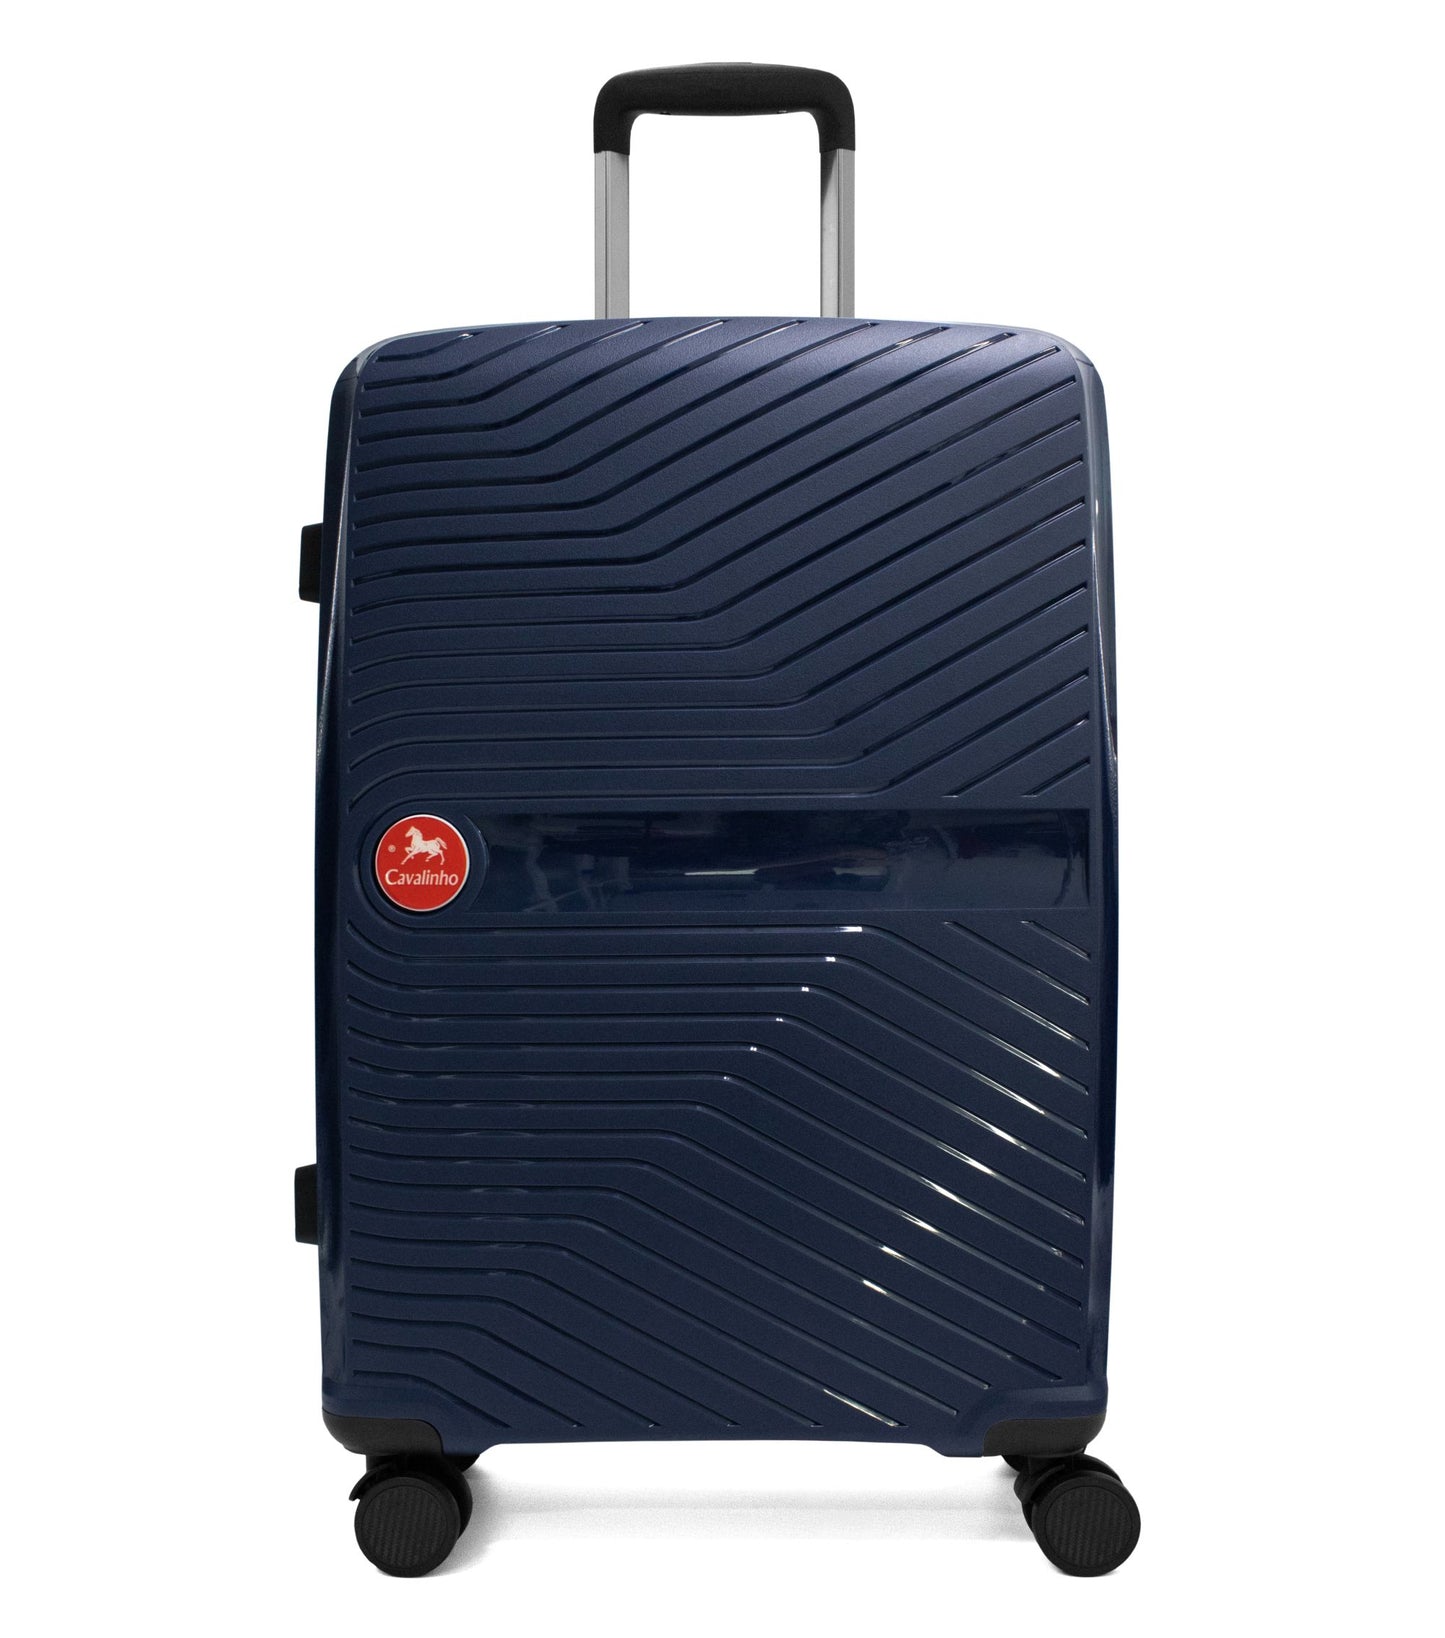 Cavalinho Colorful Check-in Hardside Luggage (24") - 24 inch Navy - 68020004.03.24_1